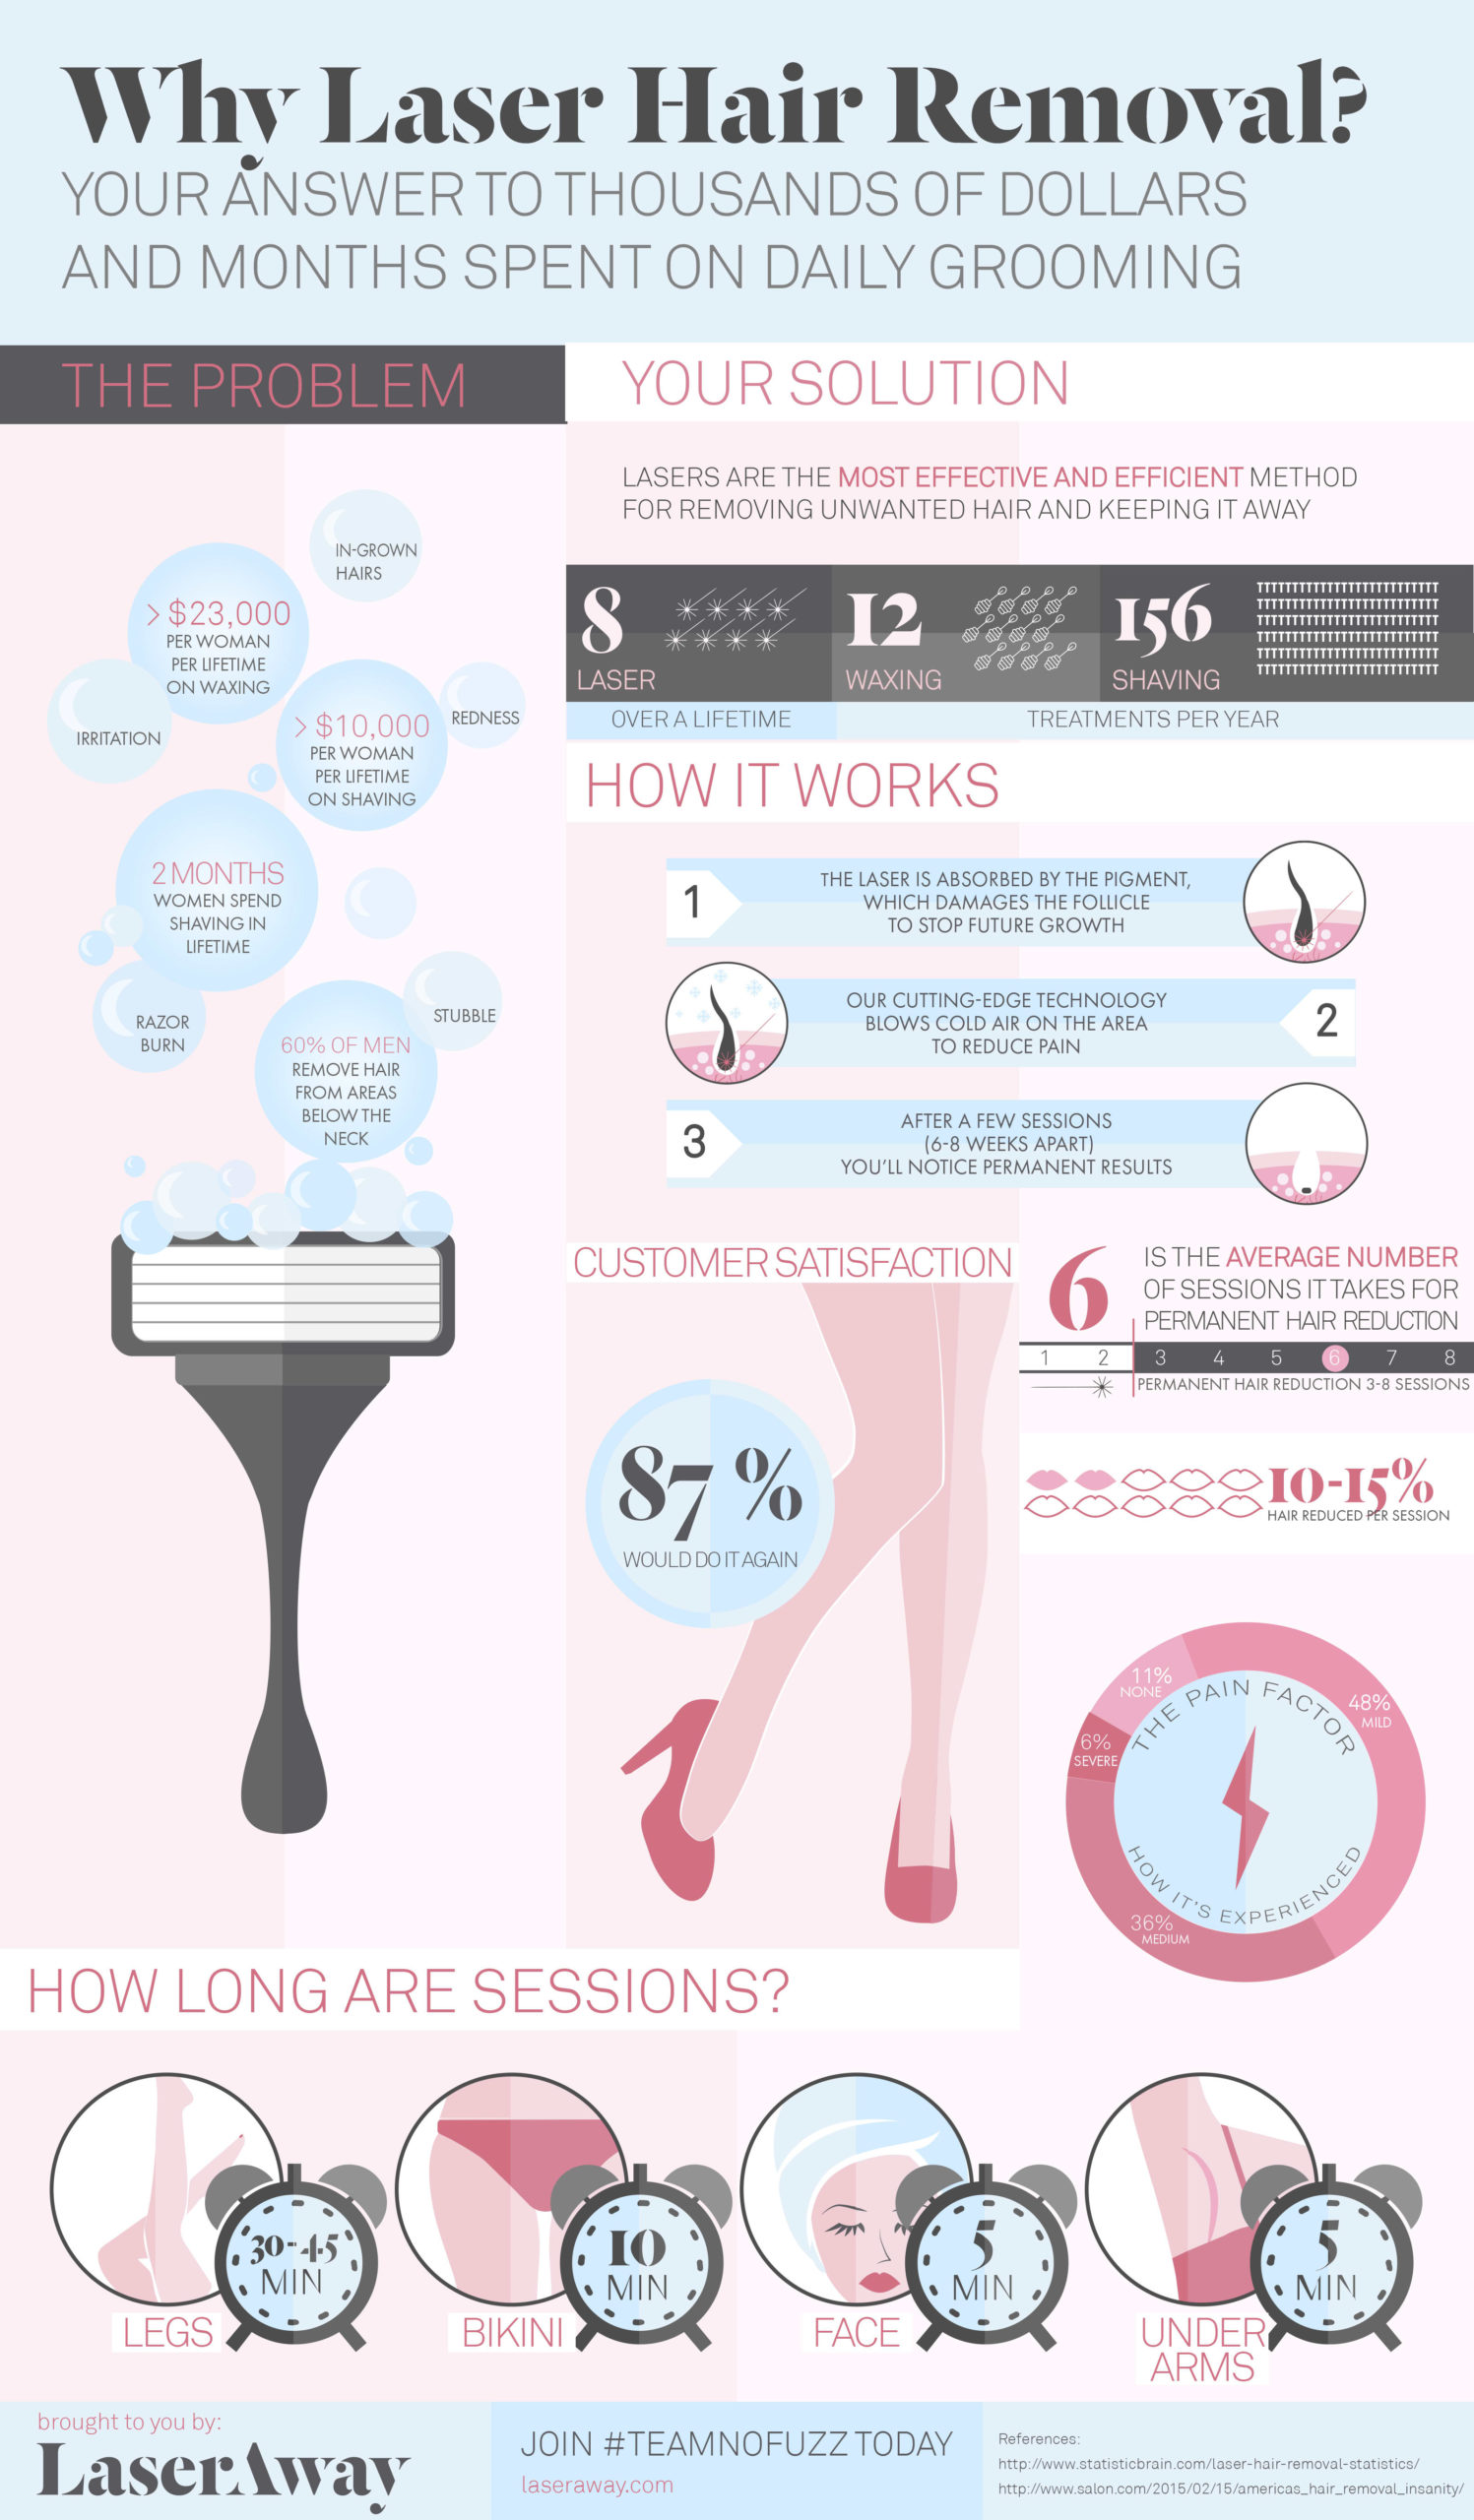 Laser away infographic image for Why Get Laser Hair Removal?